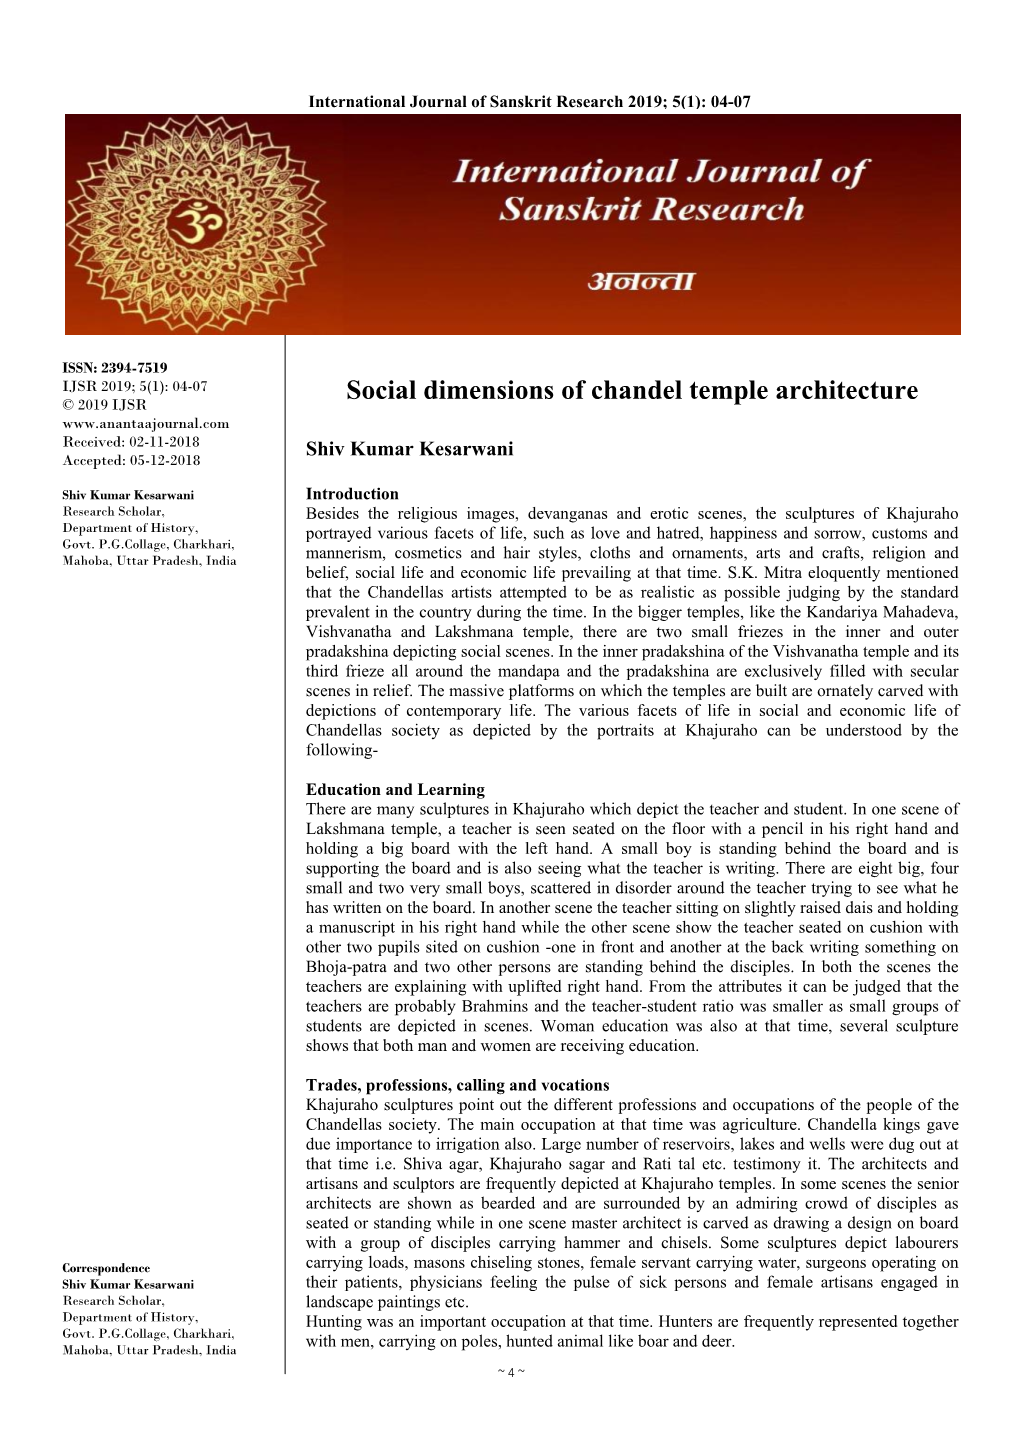 Social Dimensions of Chandel Temple Architecture © 2019 IJSR Received: 02-11-2018 Shiv Kumar Kesarwani Accepted: 05-12-2018